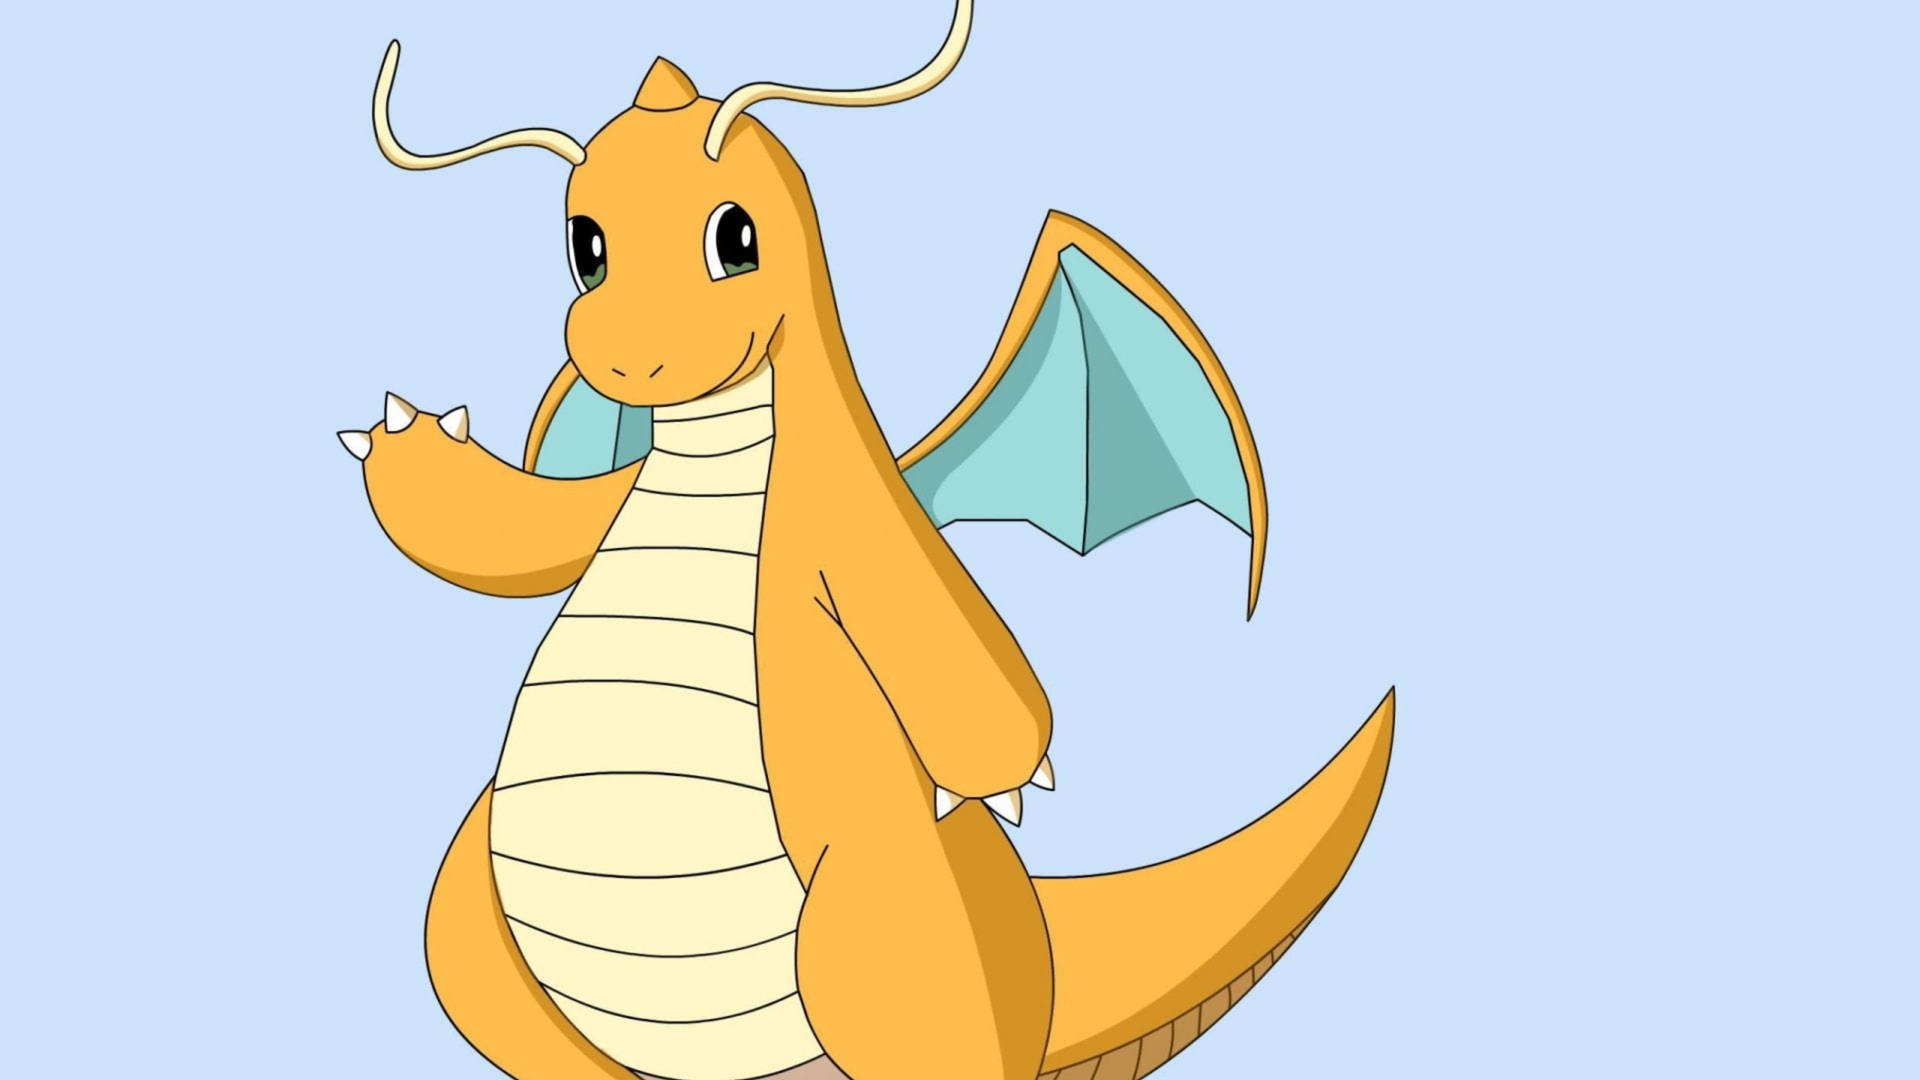 Get Ready To Take Flight With The Incredible Dragonite!